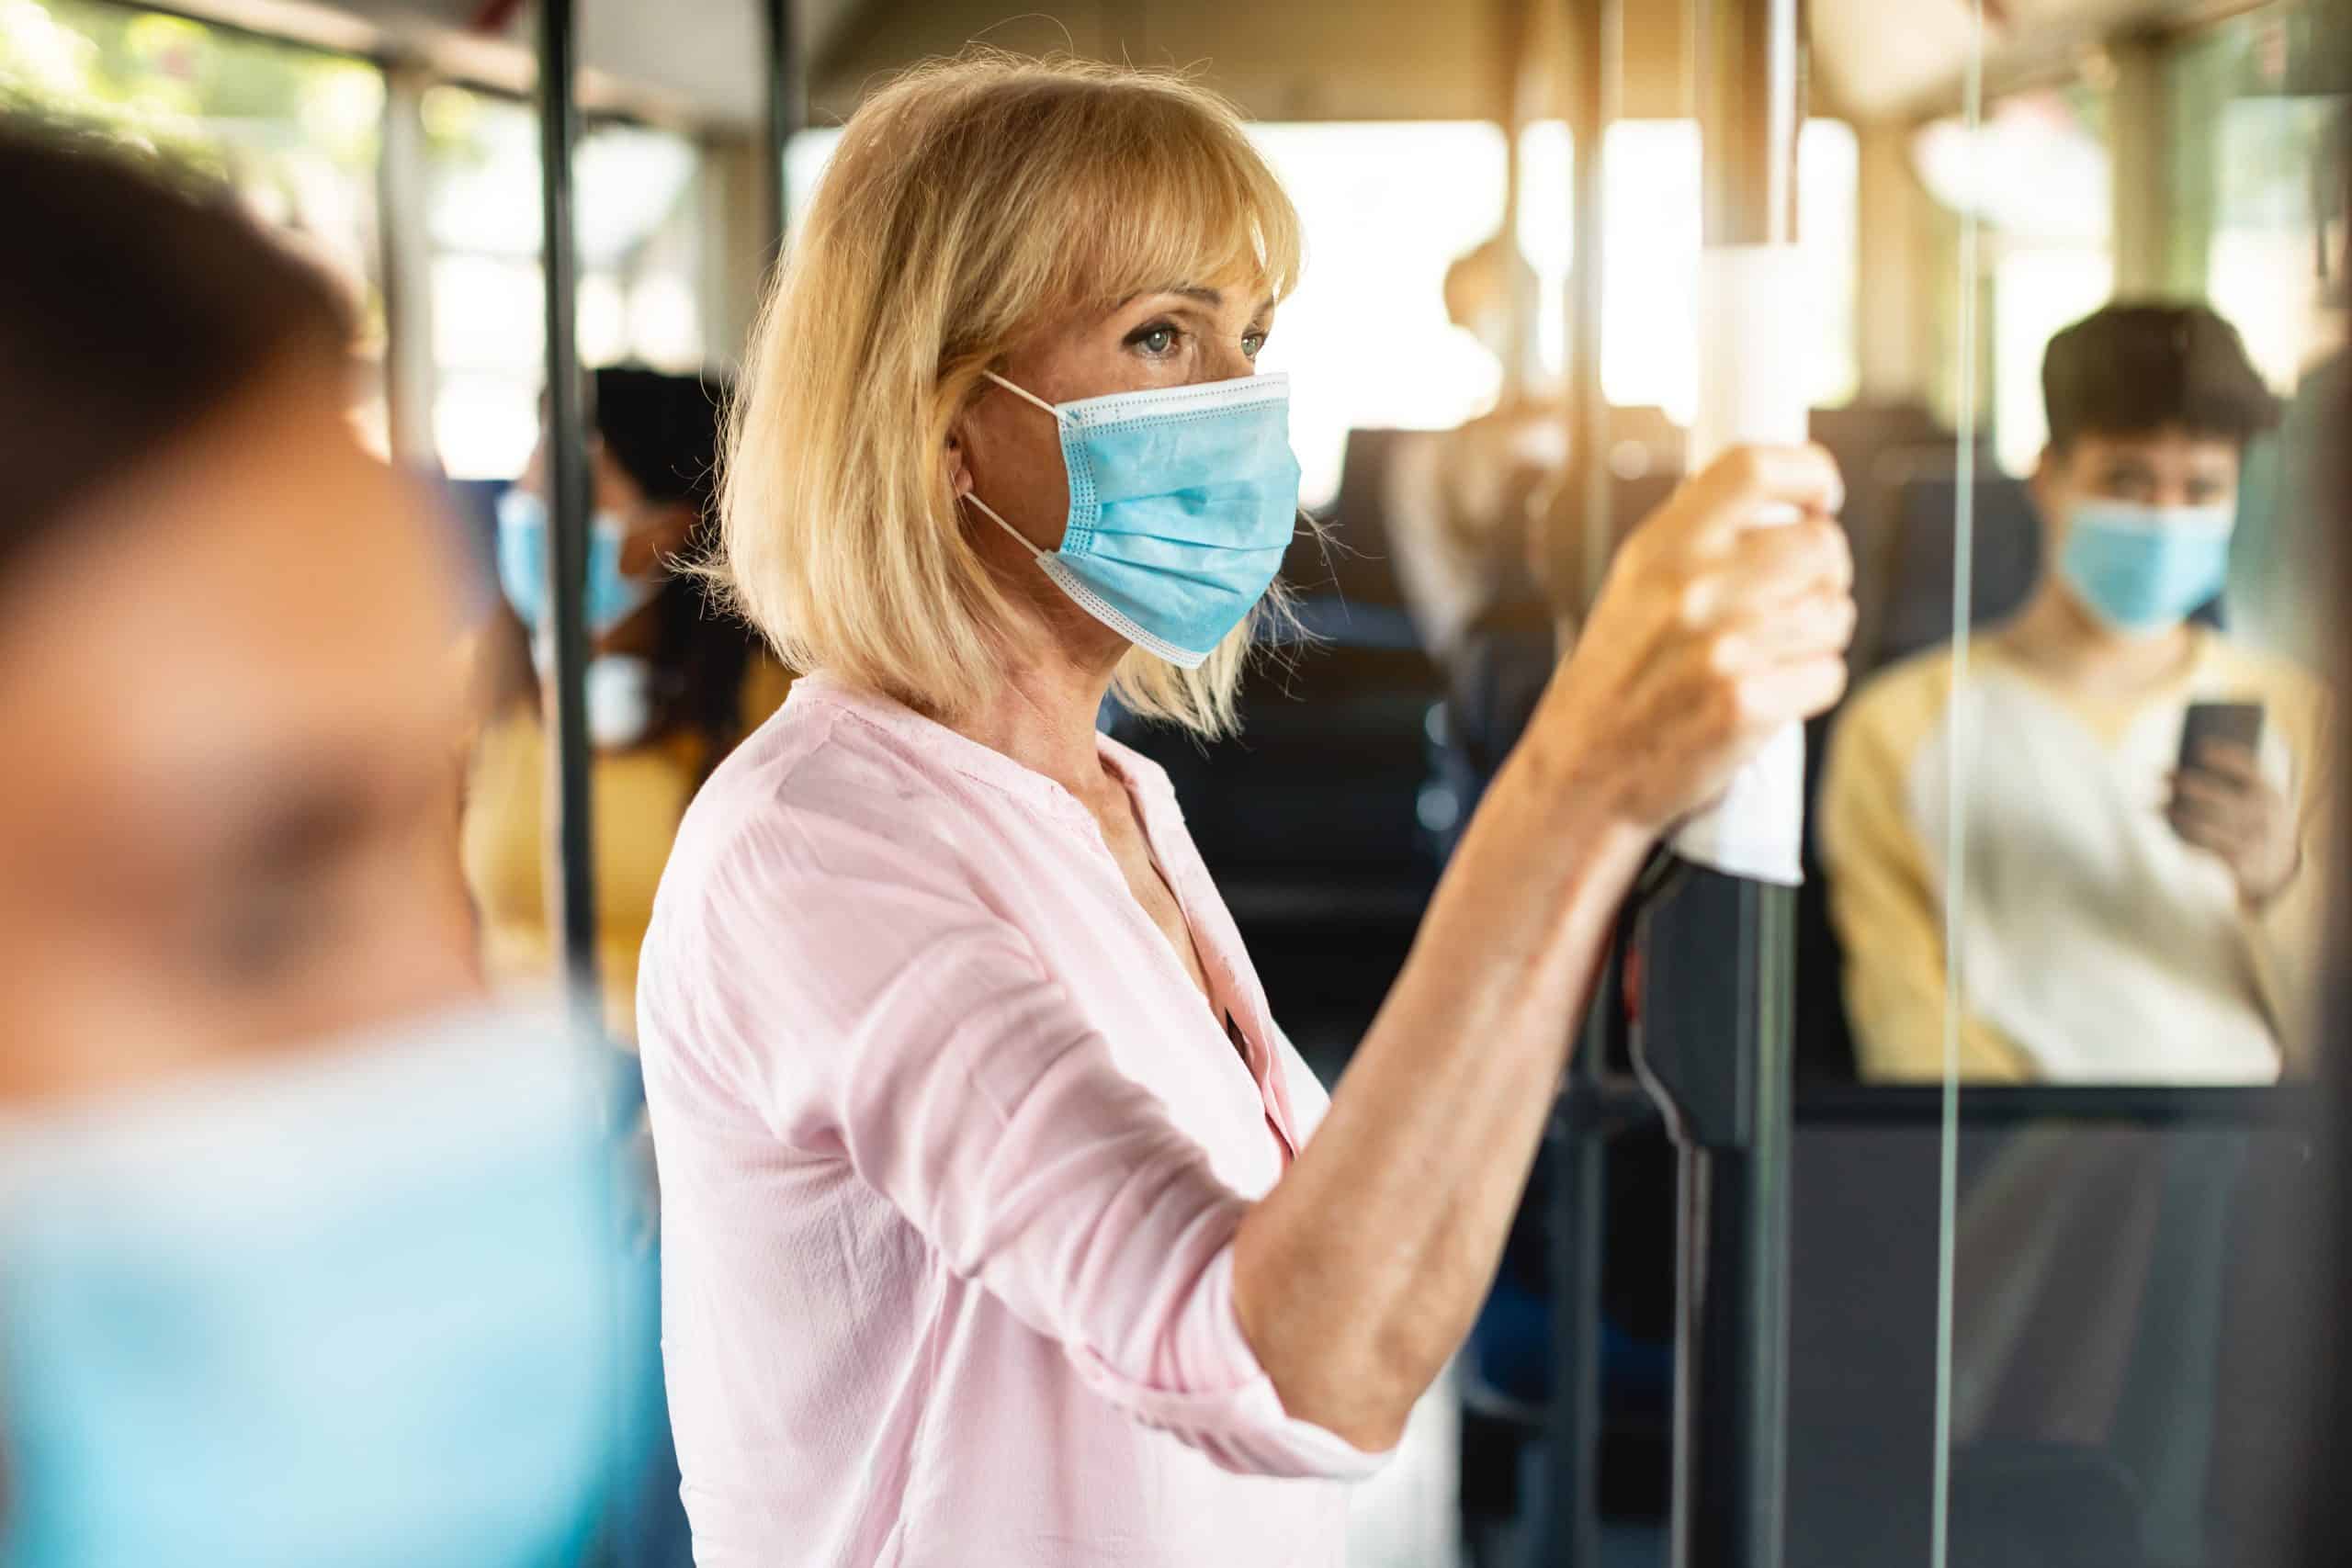 A woman wearing a medical mask on a bus